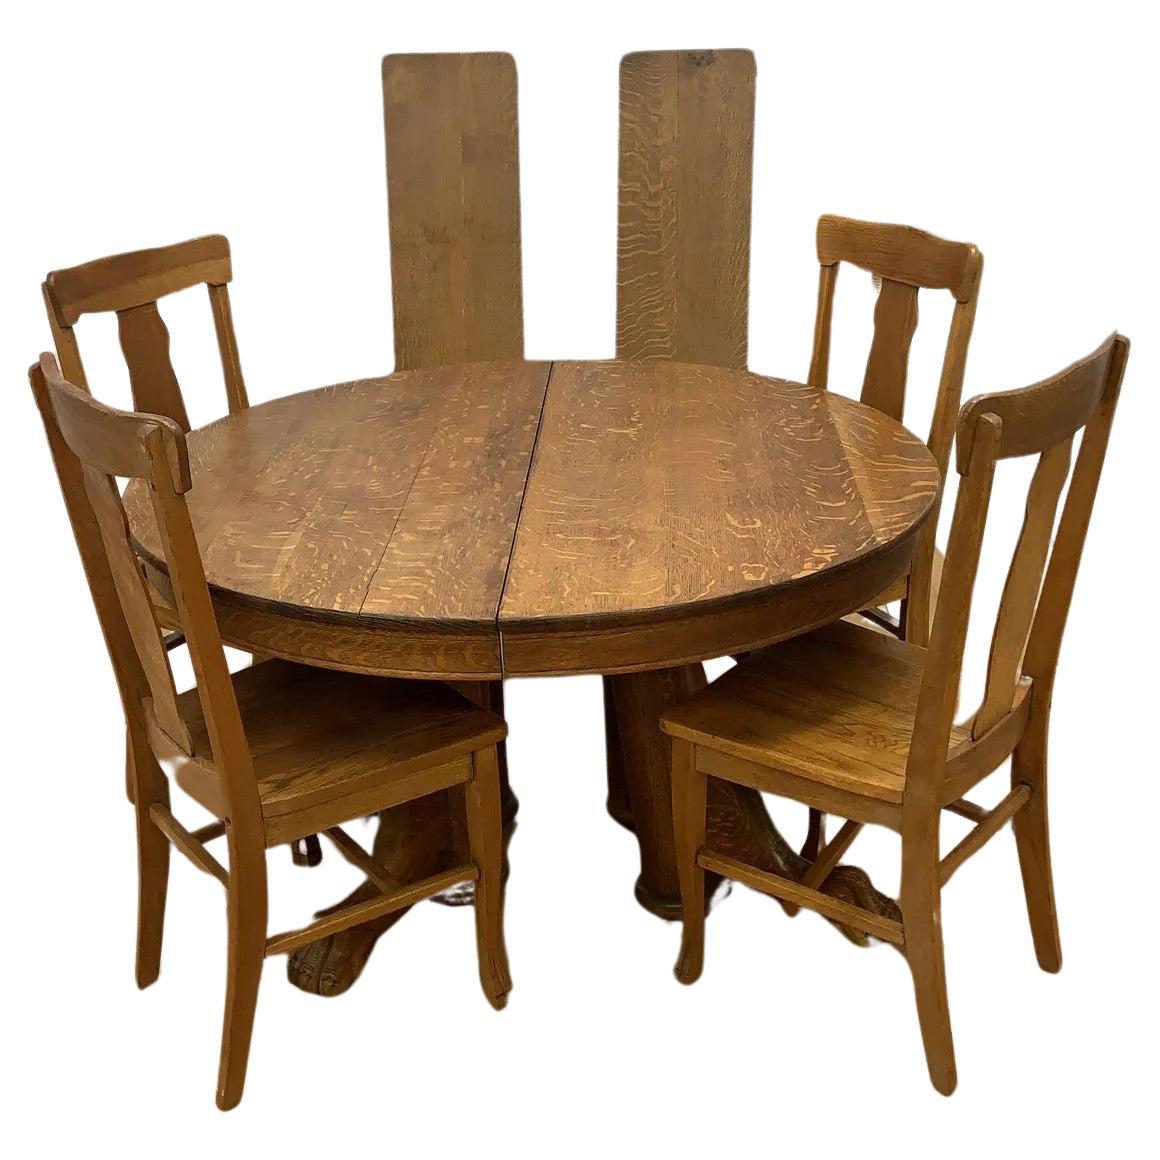 Antique Quarter Carved Lion Paw Foot 2 Leaf Dining/Game Table with 4 Chairs